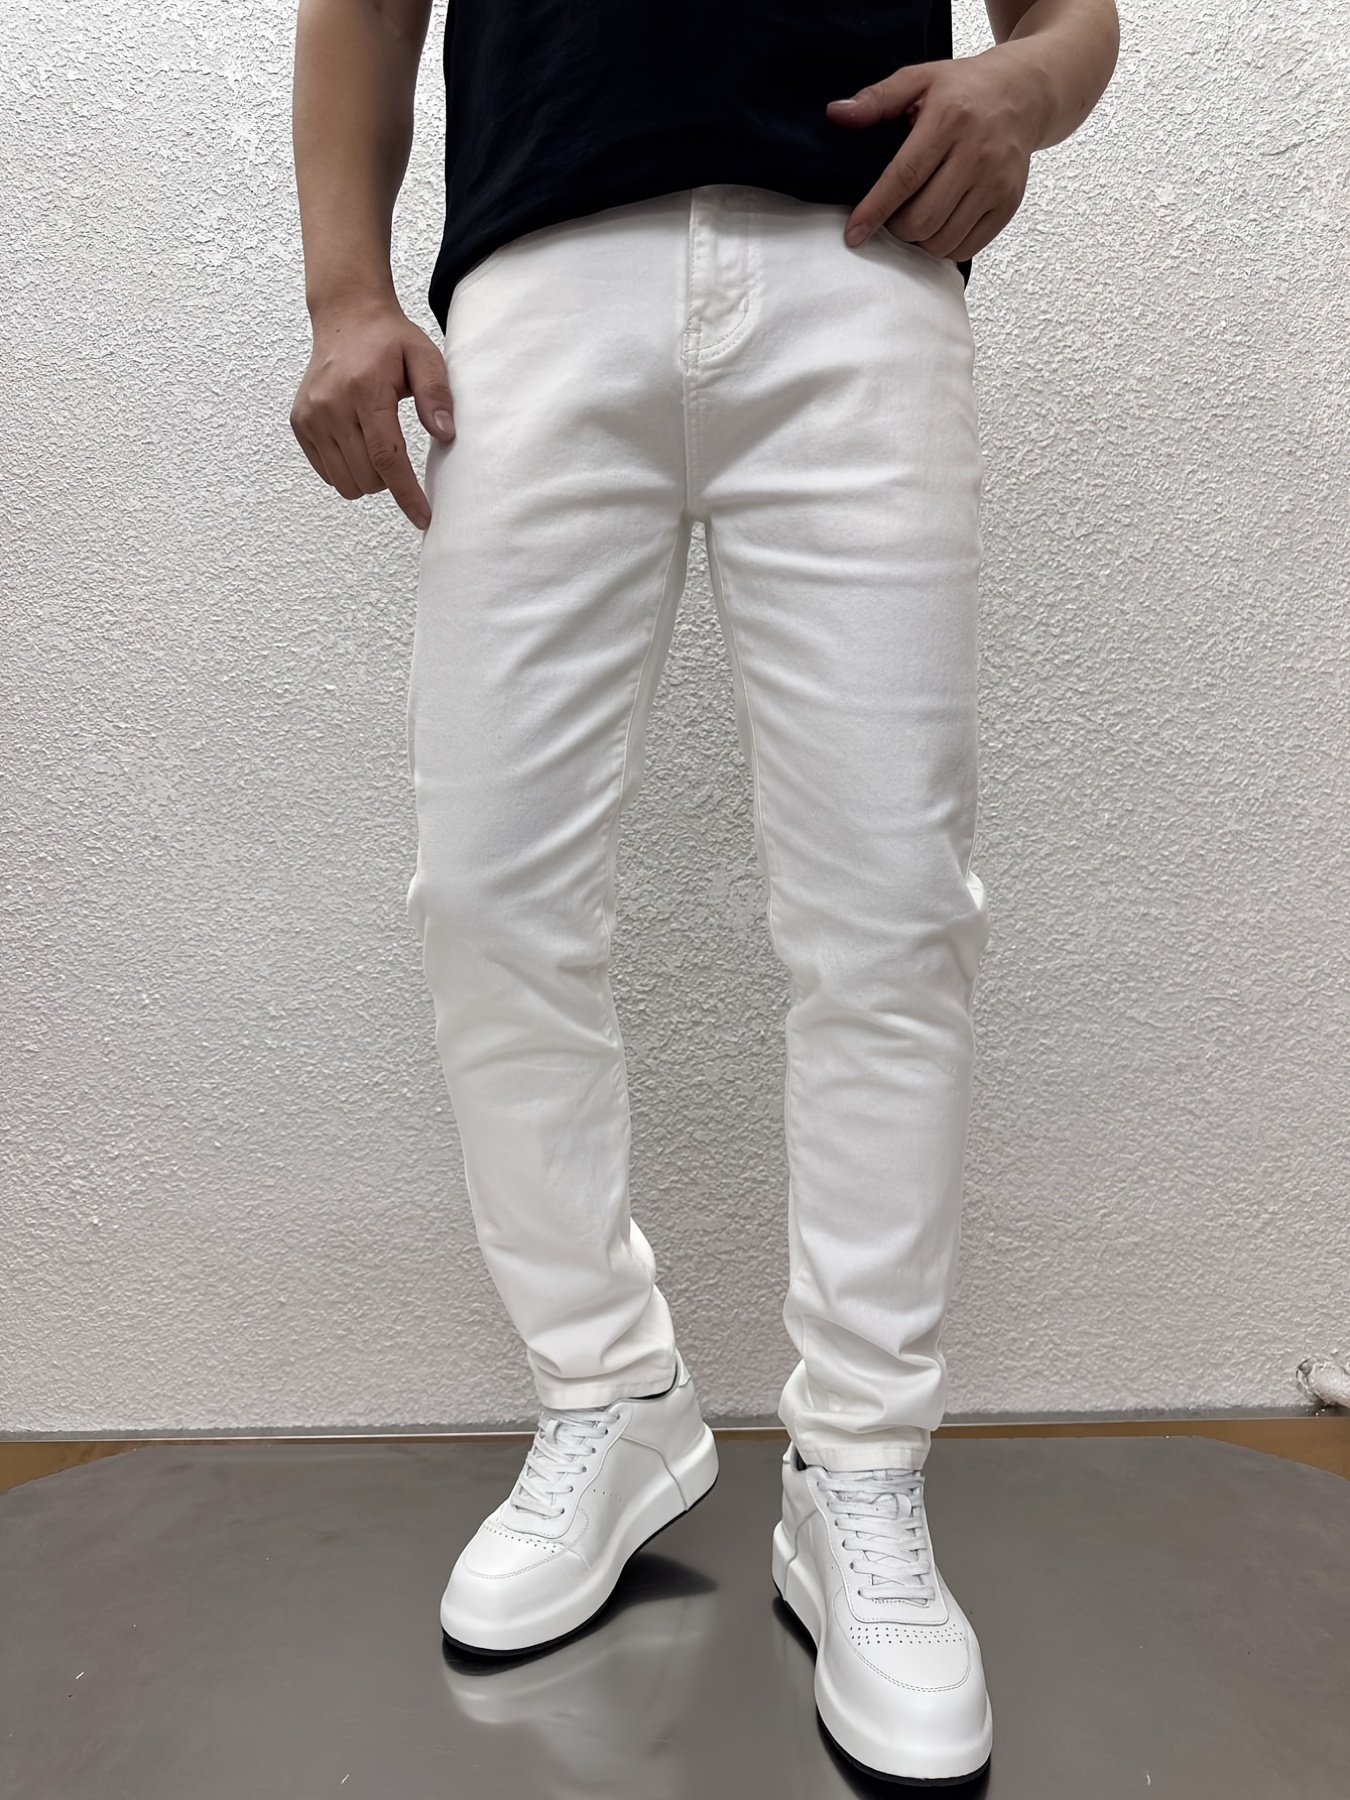 How should I style white pants? - Quora